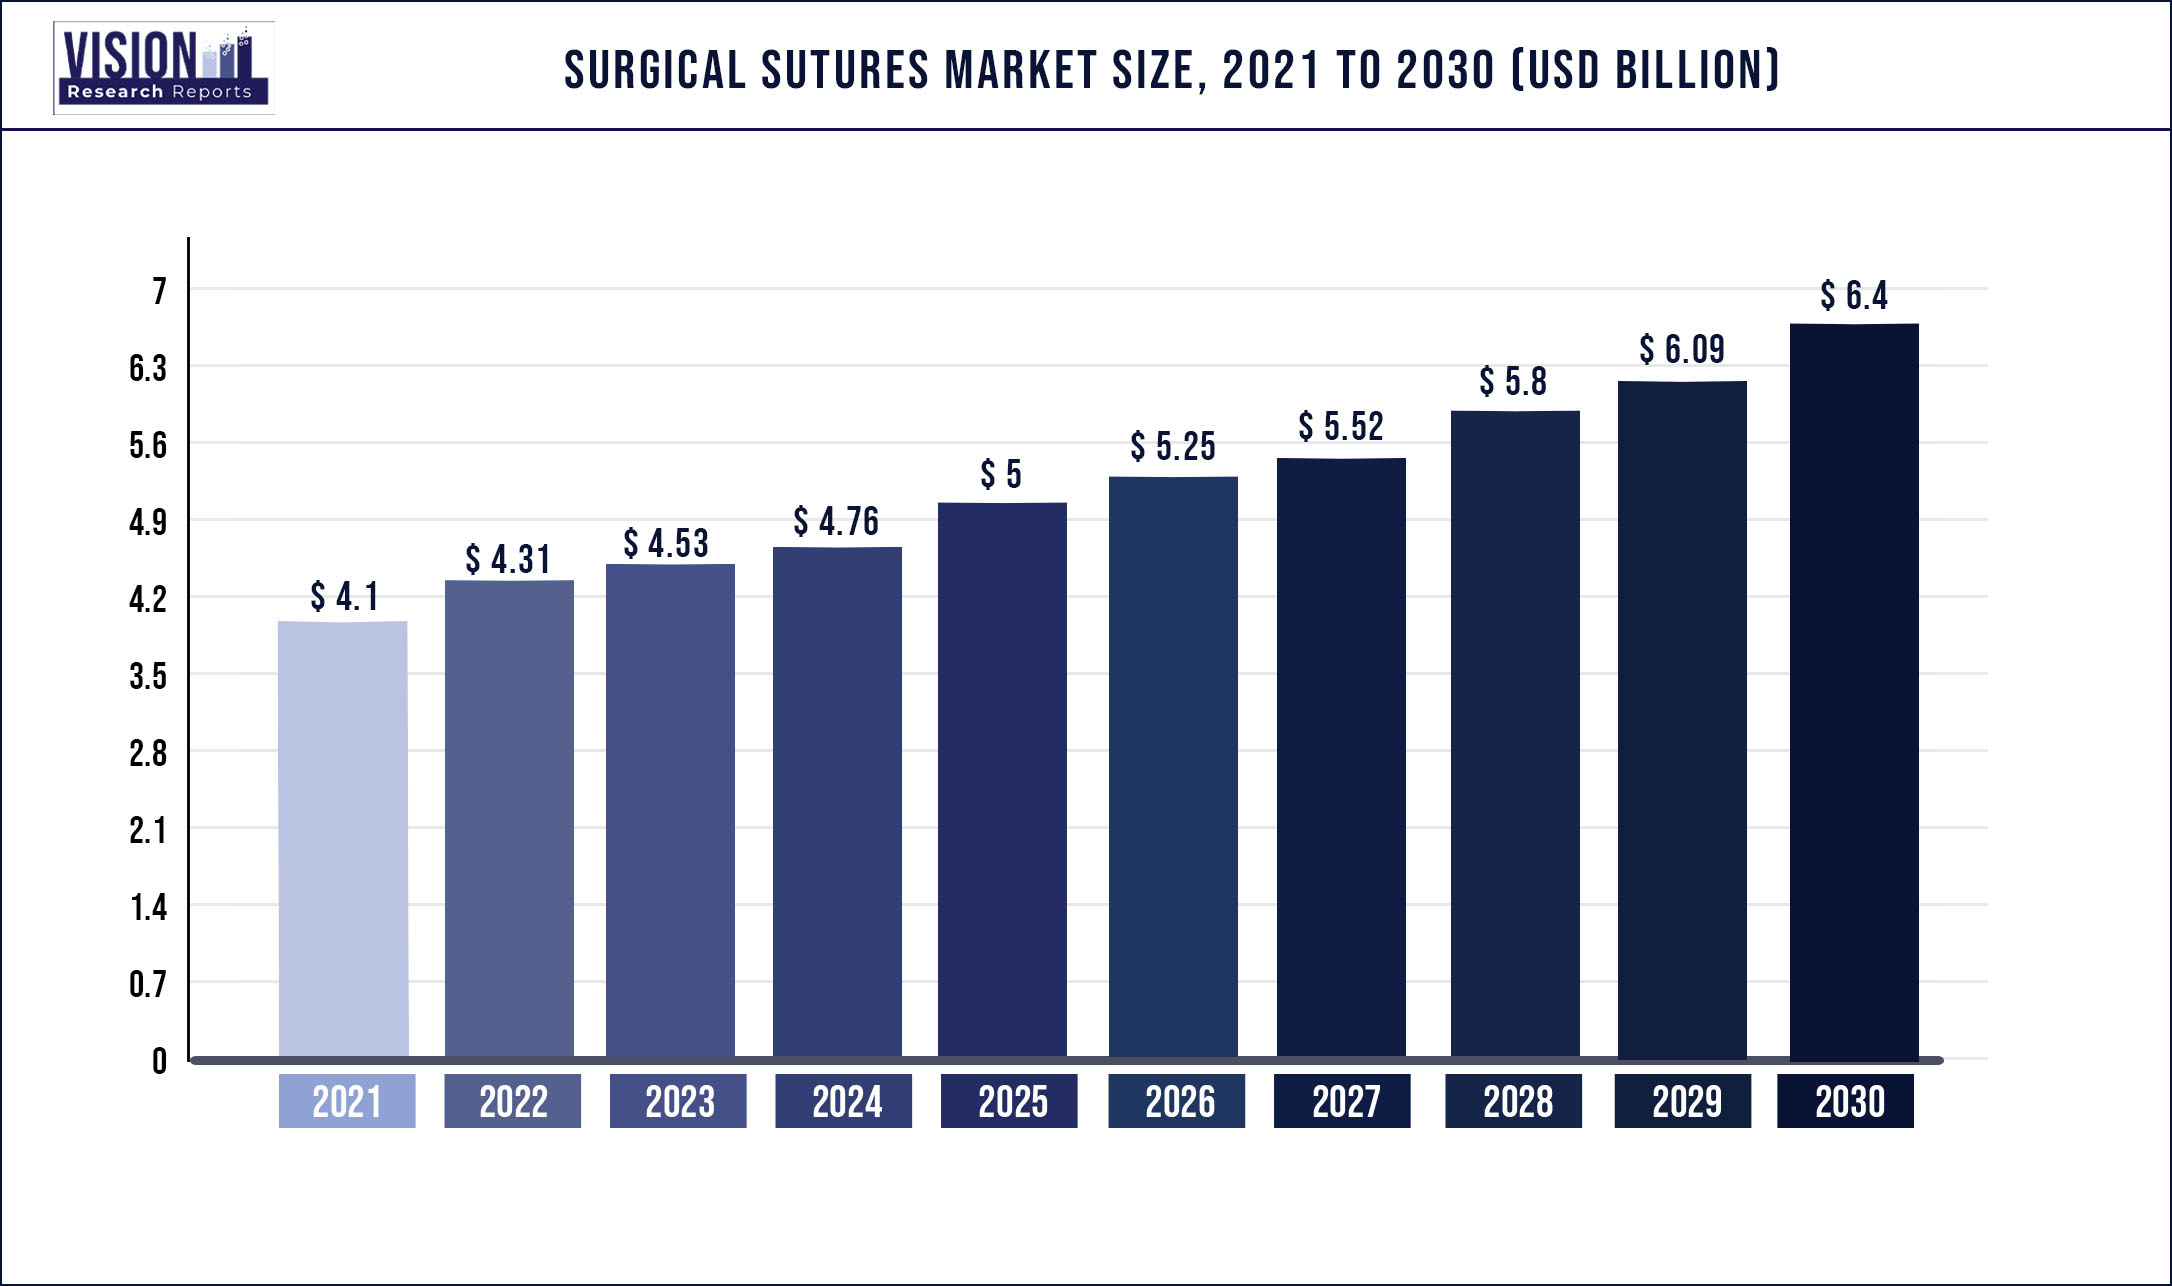 Surgical Sutures Market Size 2021 to 2030